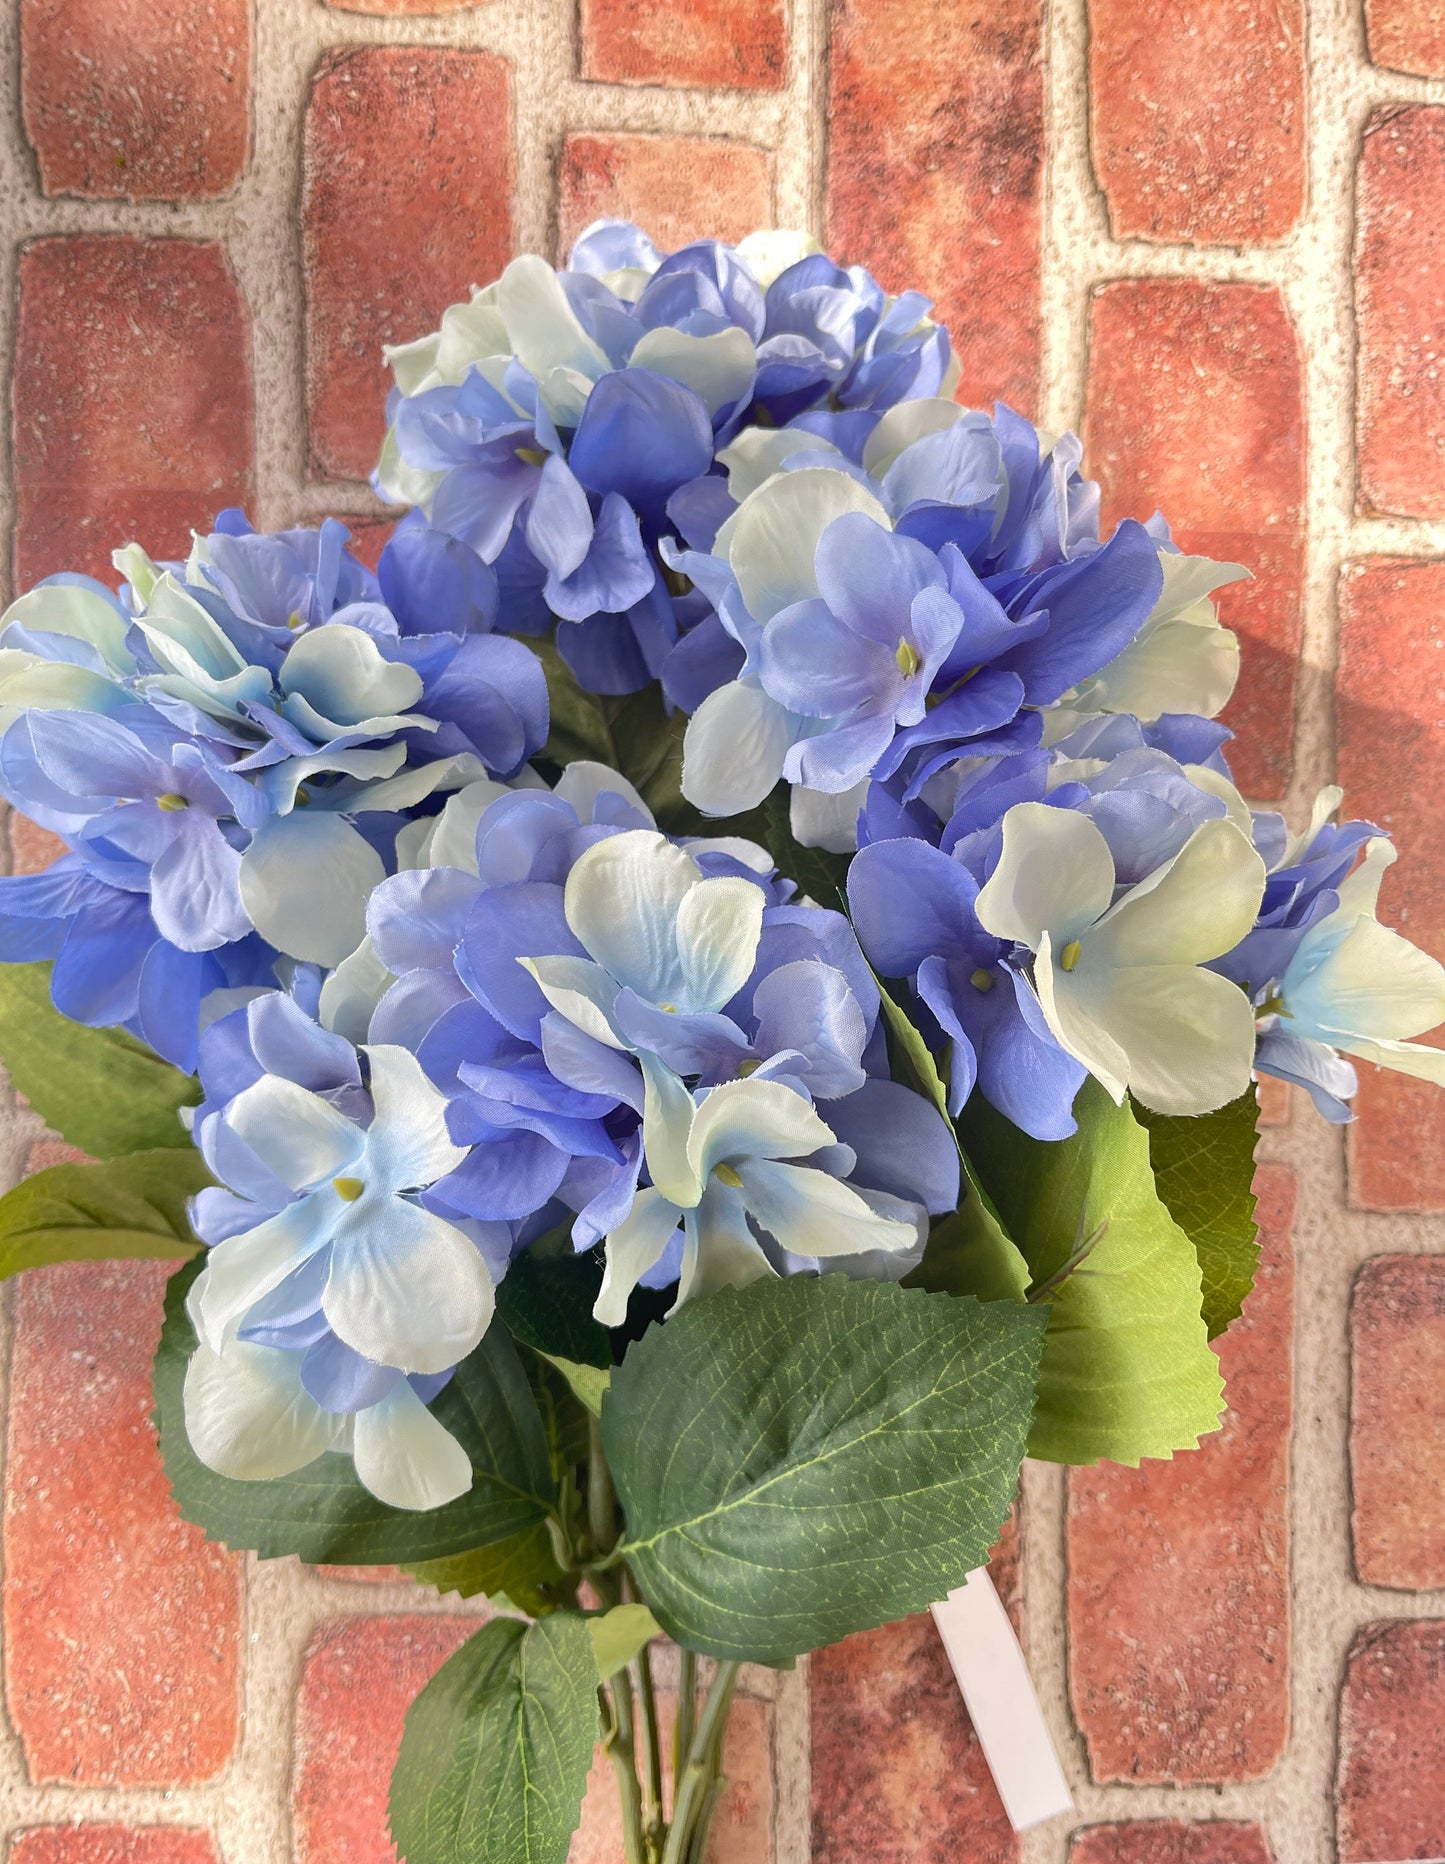 Blue Hydrangea Floral Bunch, Greenery, Floral Supplies, Wreath Greenery, Floral Greenery, Picks, Craft Supply, Home Decor